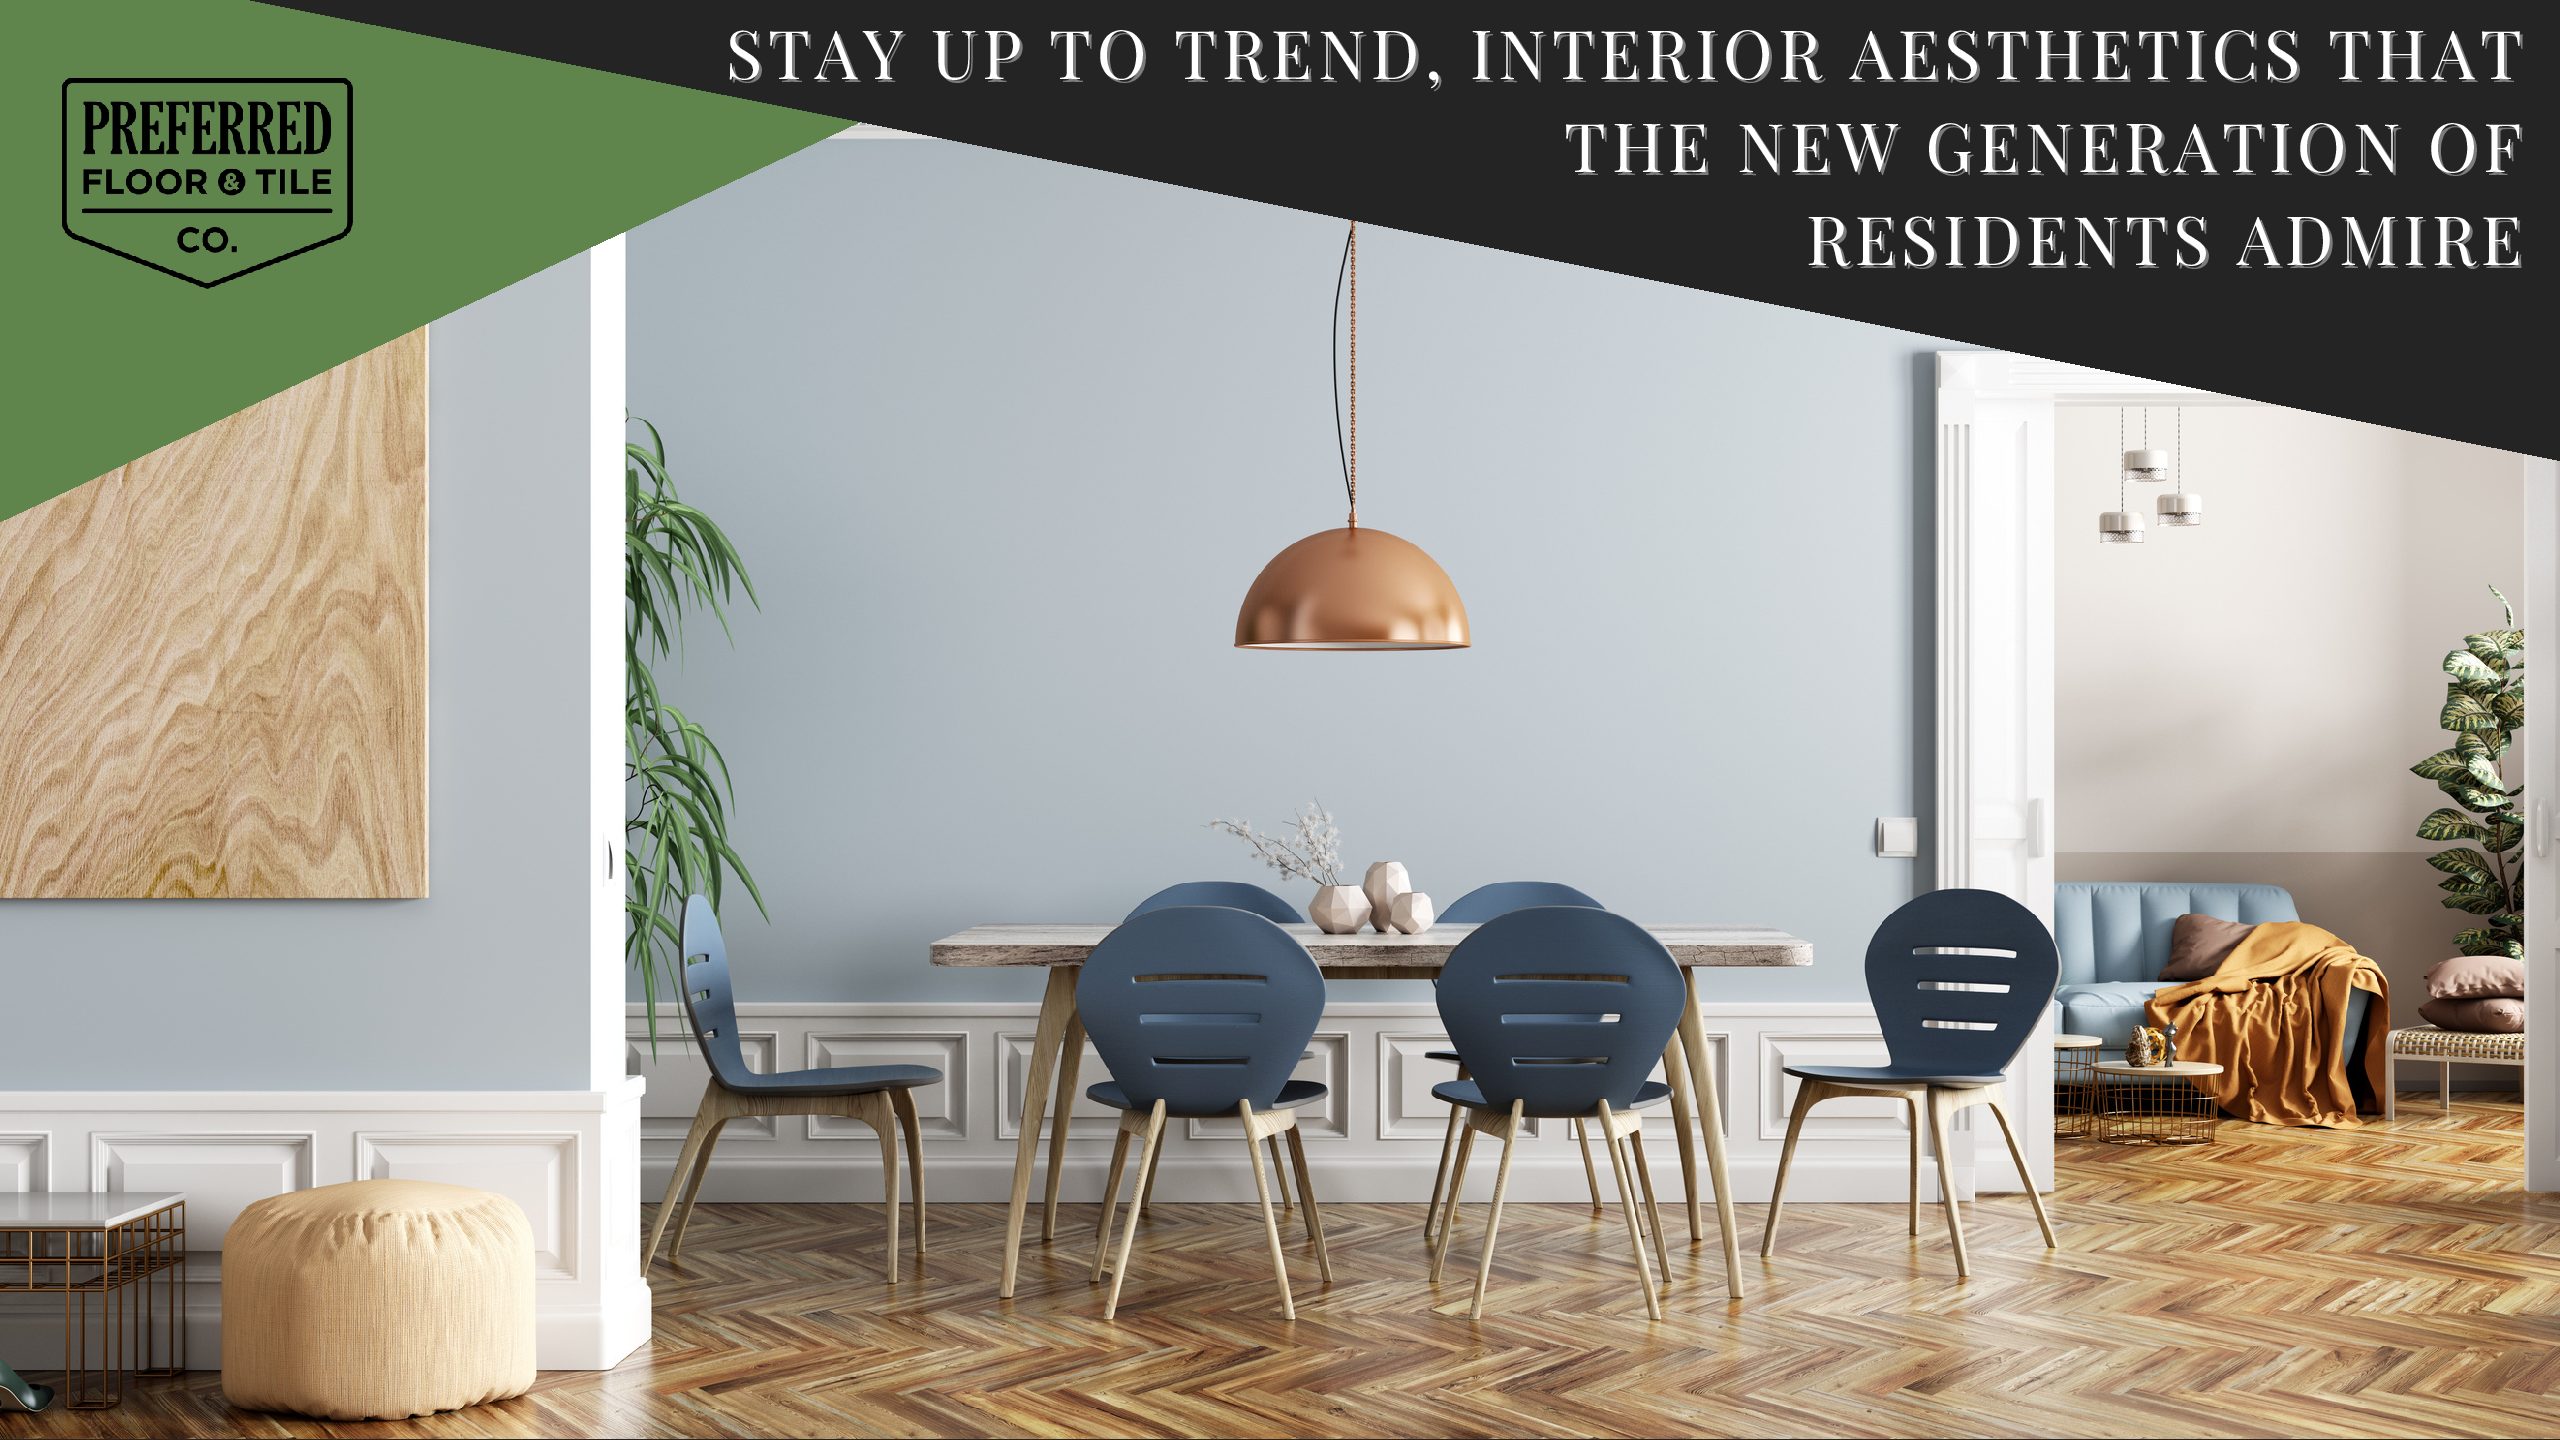 Stay Up to Trend, Interior Aesthetics that the New Generation of Residents Admire